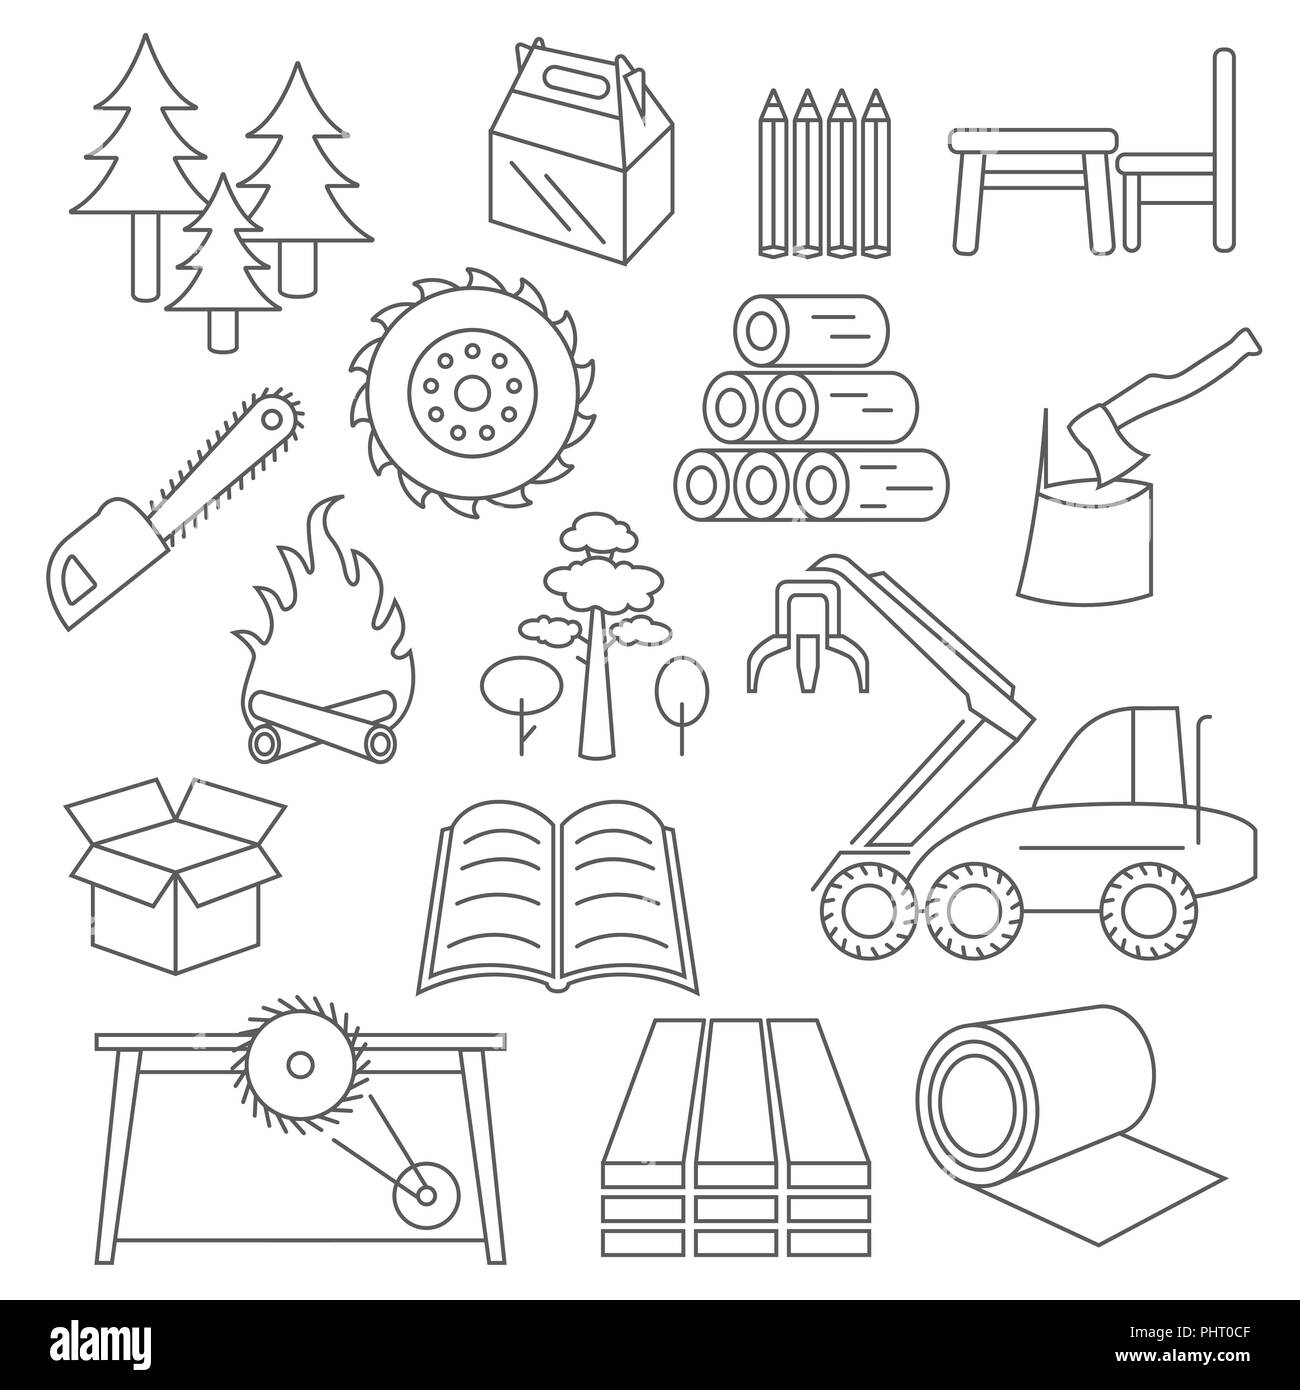 Pulp, paper and wood products icon set. Thin line design isolated on white. Create your industrial infographics collection. Vector illustration Stock Vector